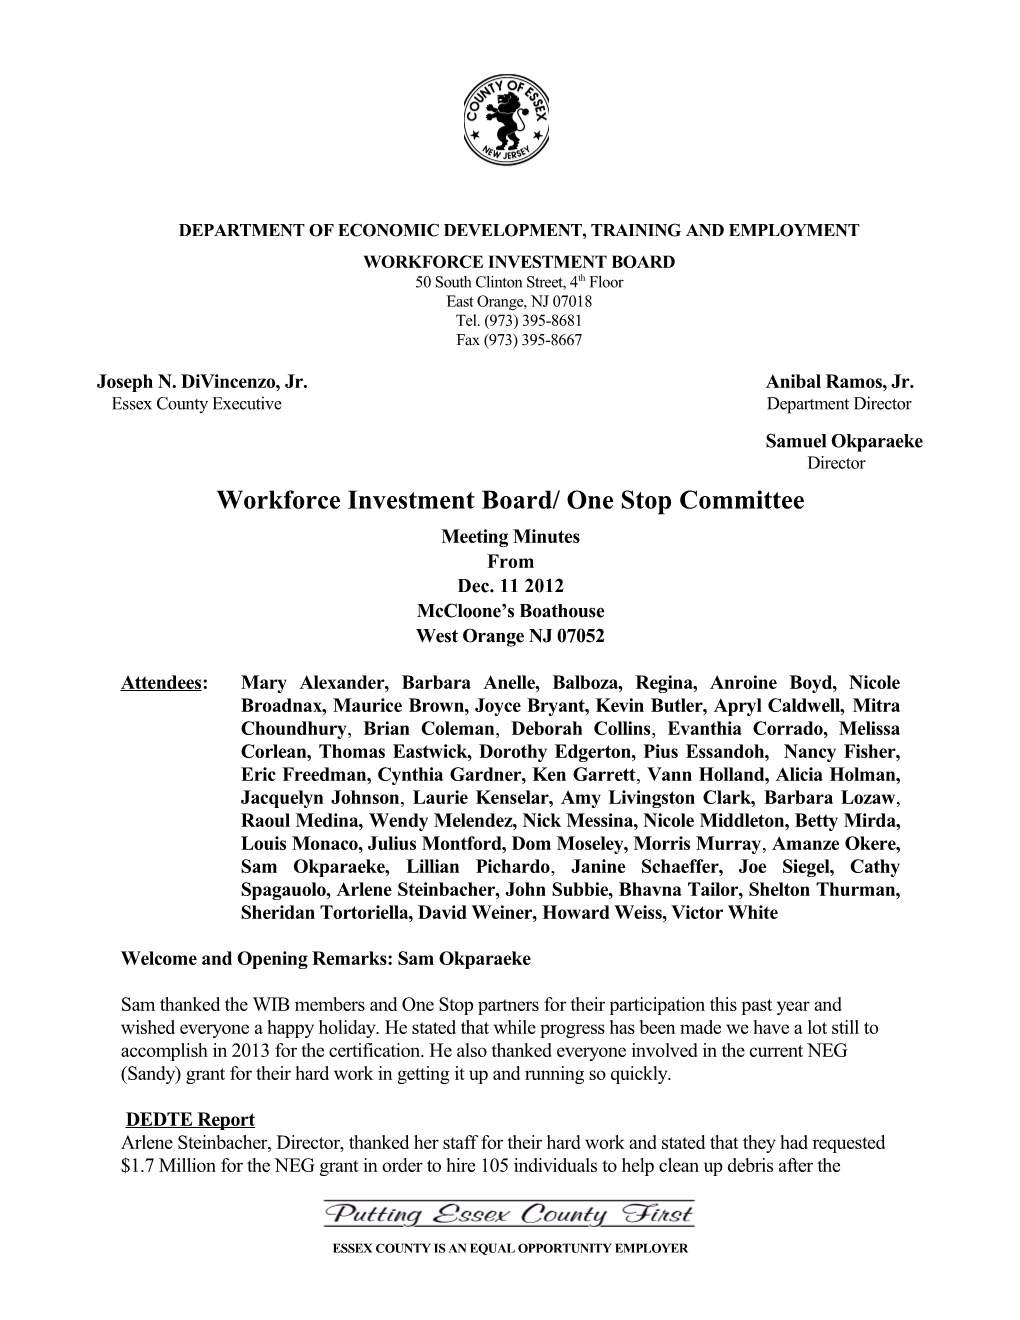 Workforce Investment Board/ One Stop Committee